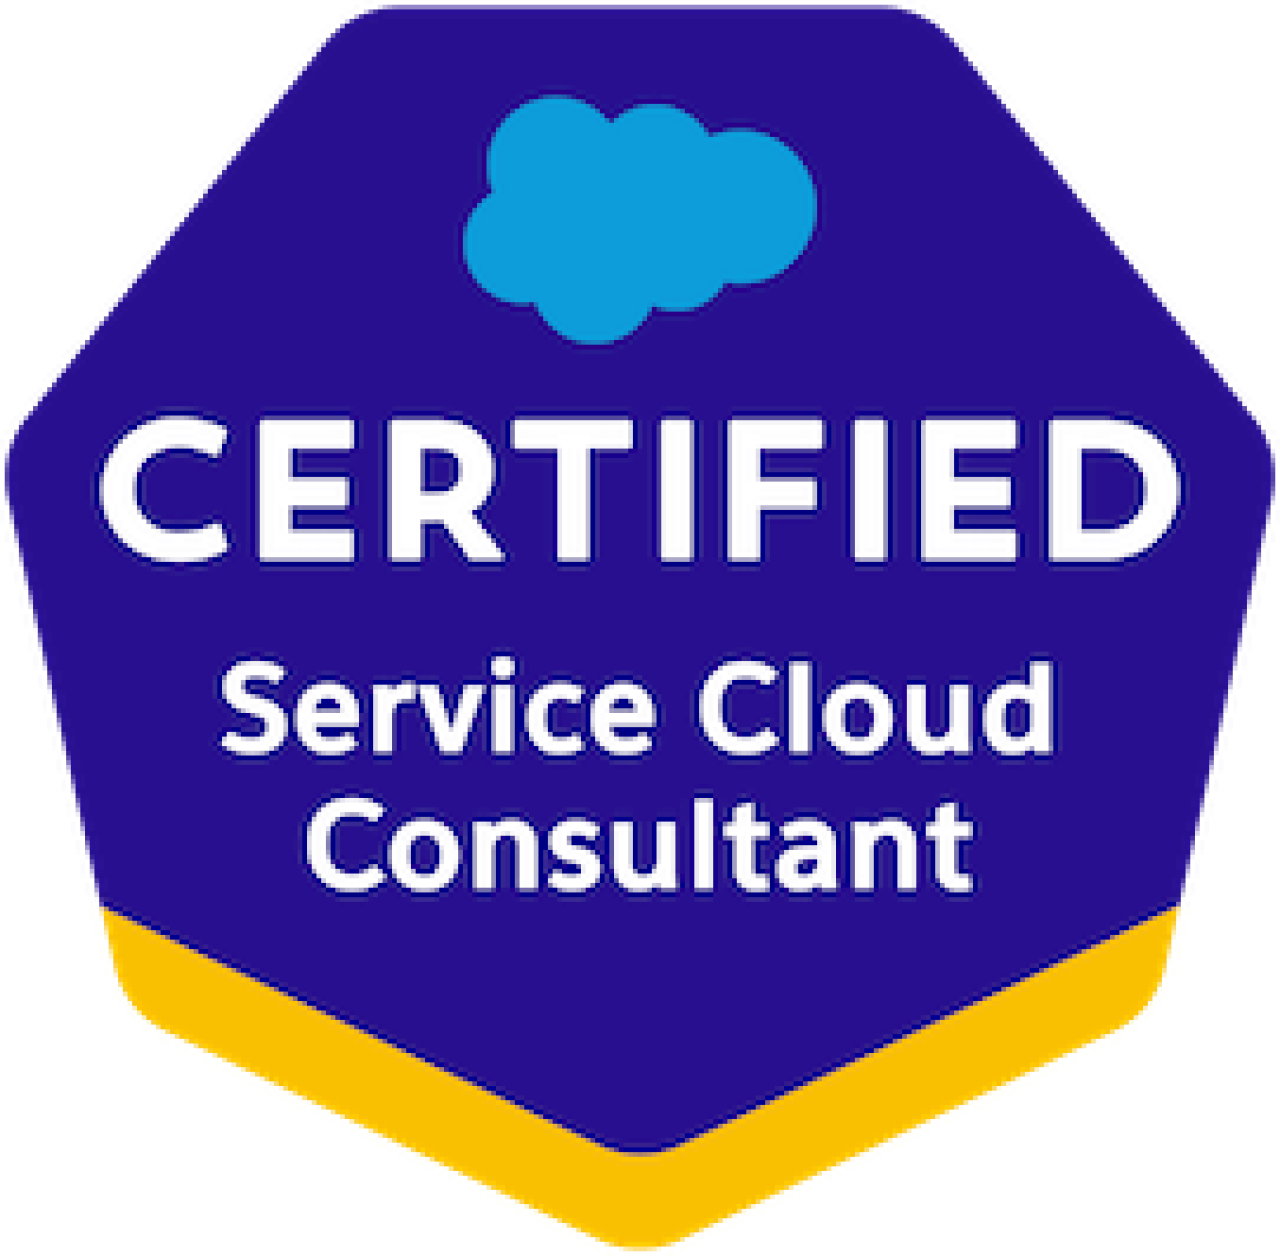 Salesforce Certified Service Cloud Consultant.